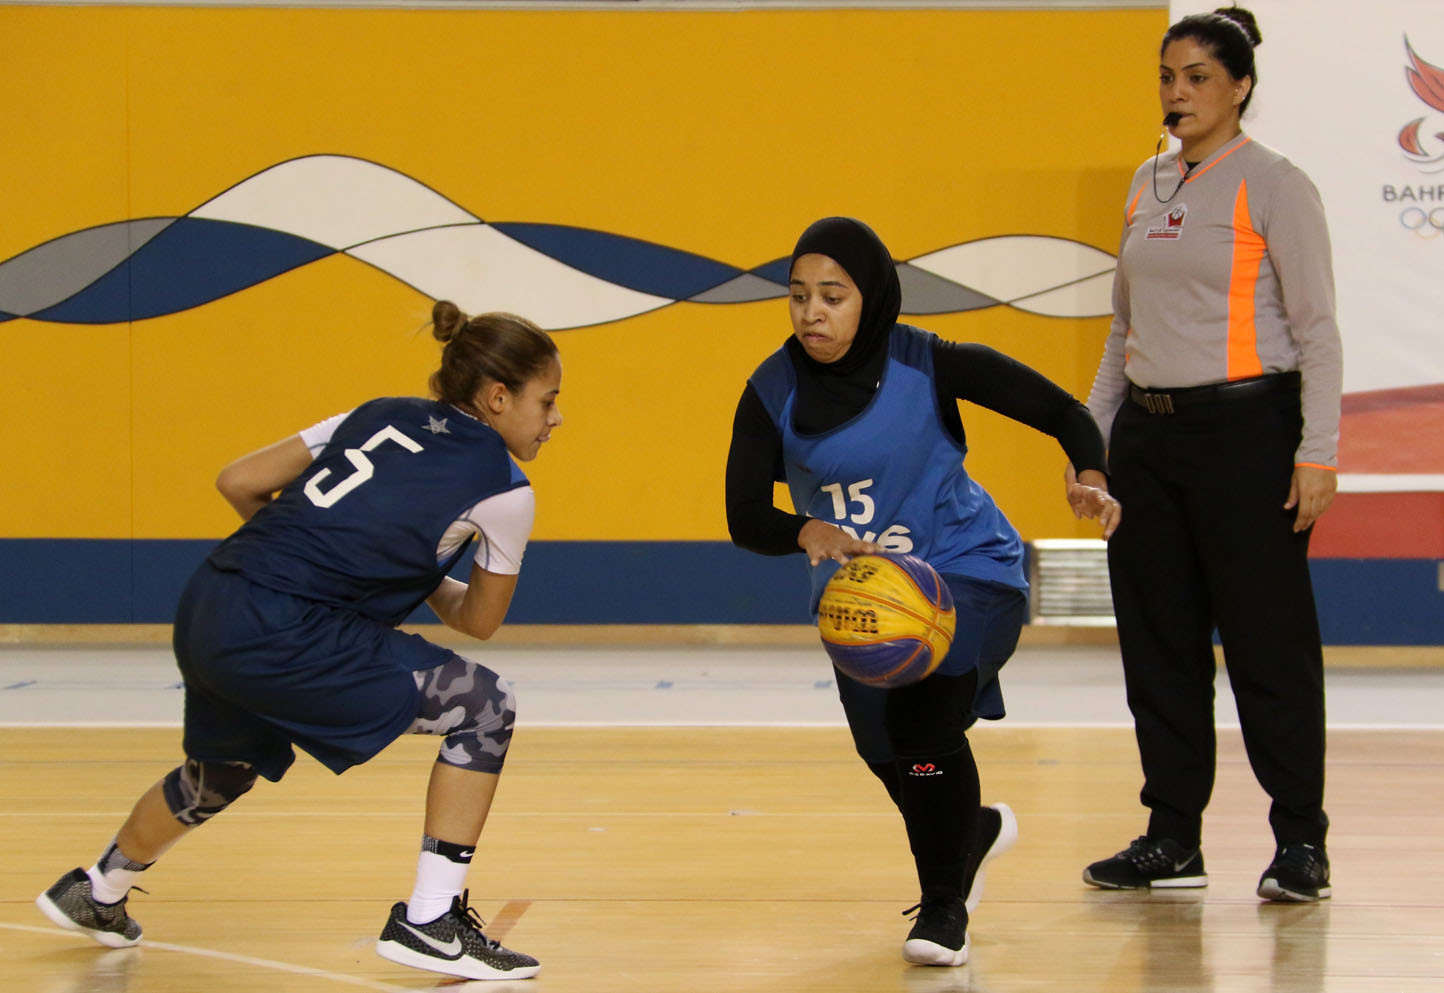 3x3 basketball was among the sports contested at last year's Bahrain Women's Day Sportsfest ©BOC